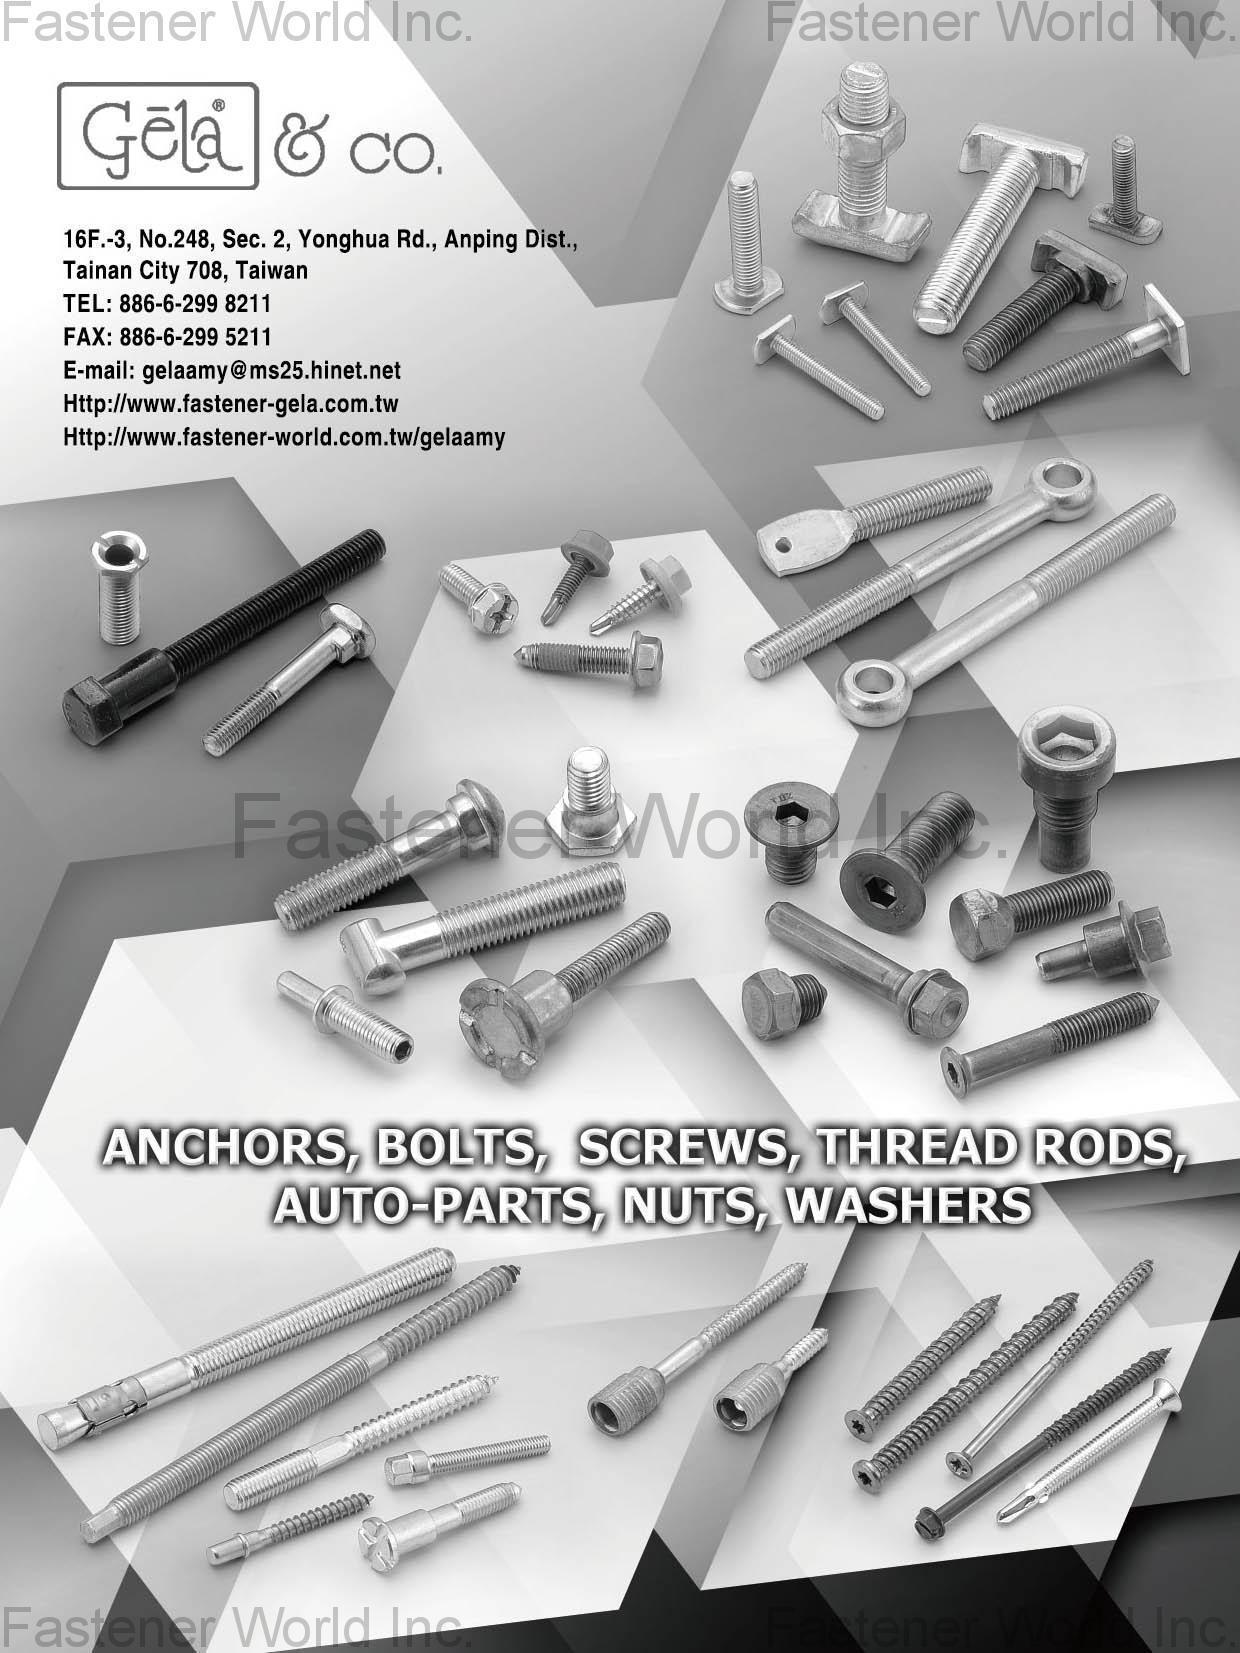 GELA & COMPANY  , Anchors, Bolts, Screws, Thread Rods, Auto-Parts, Nuts, Washers , Thread Rod